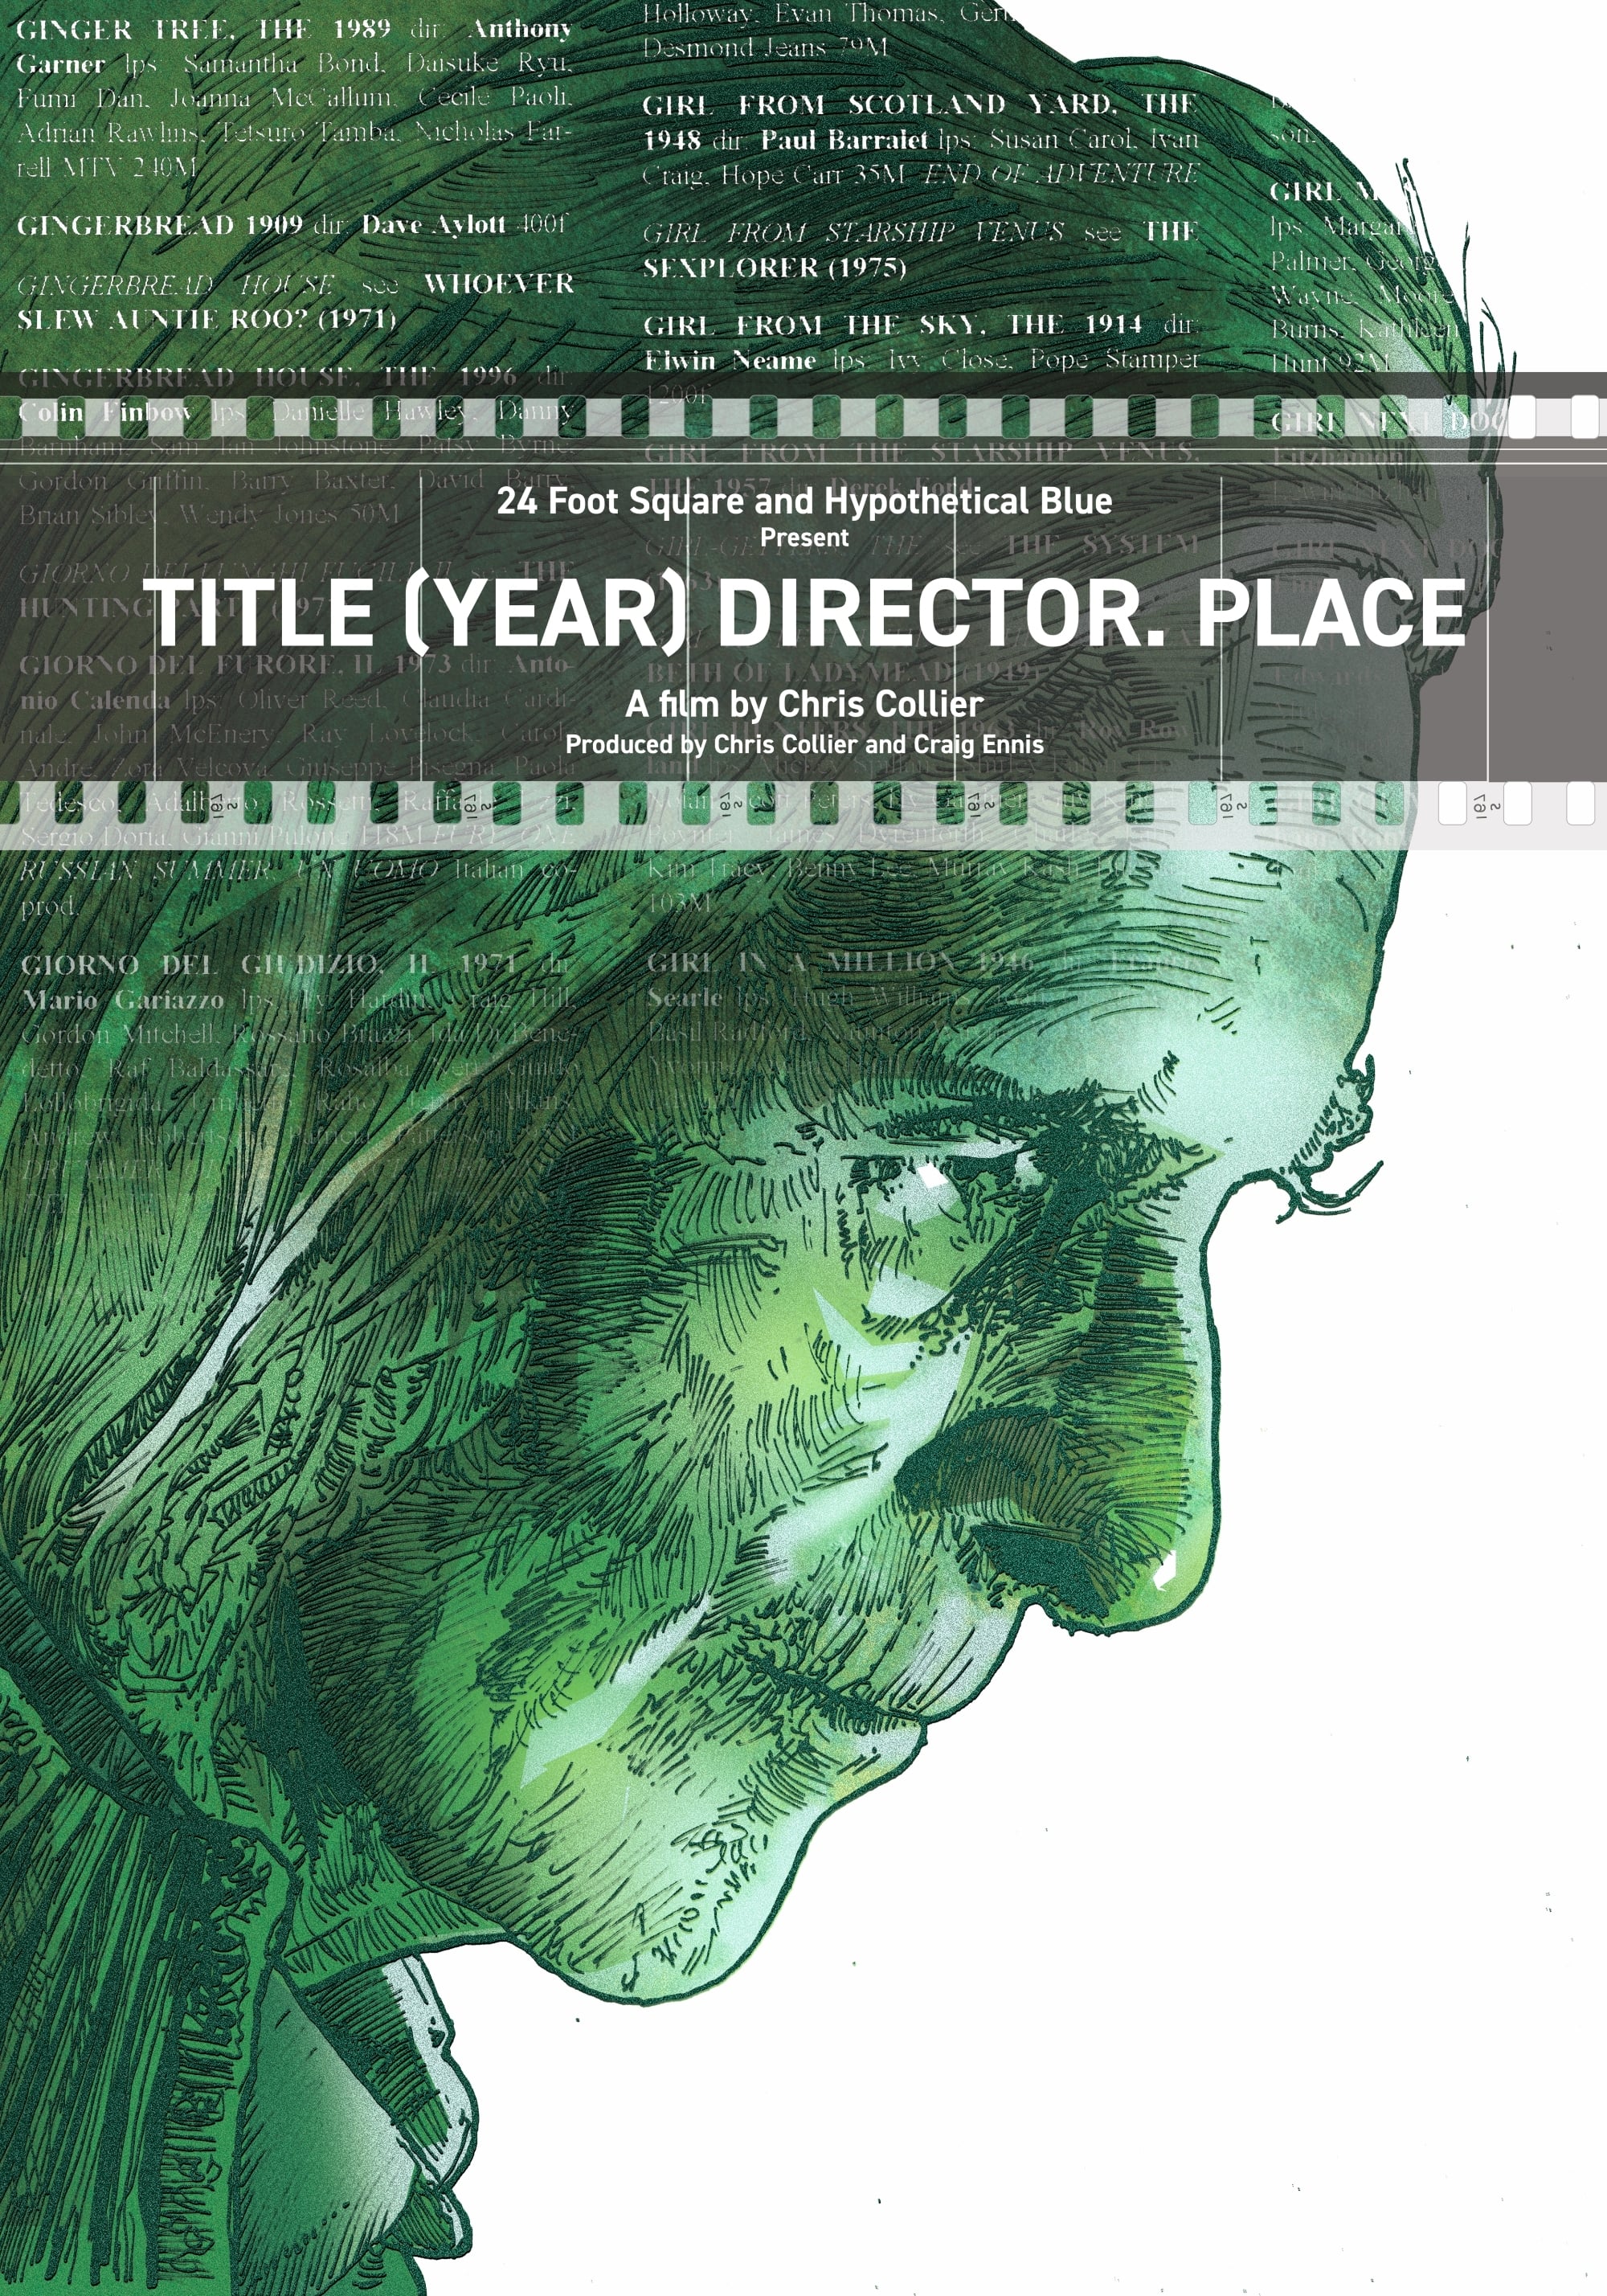 Title (Year) Director. Place